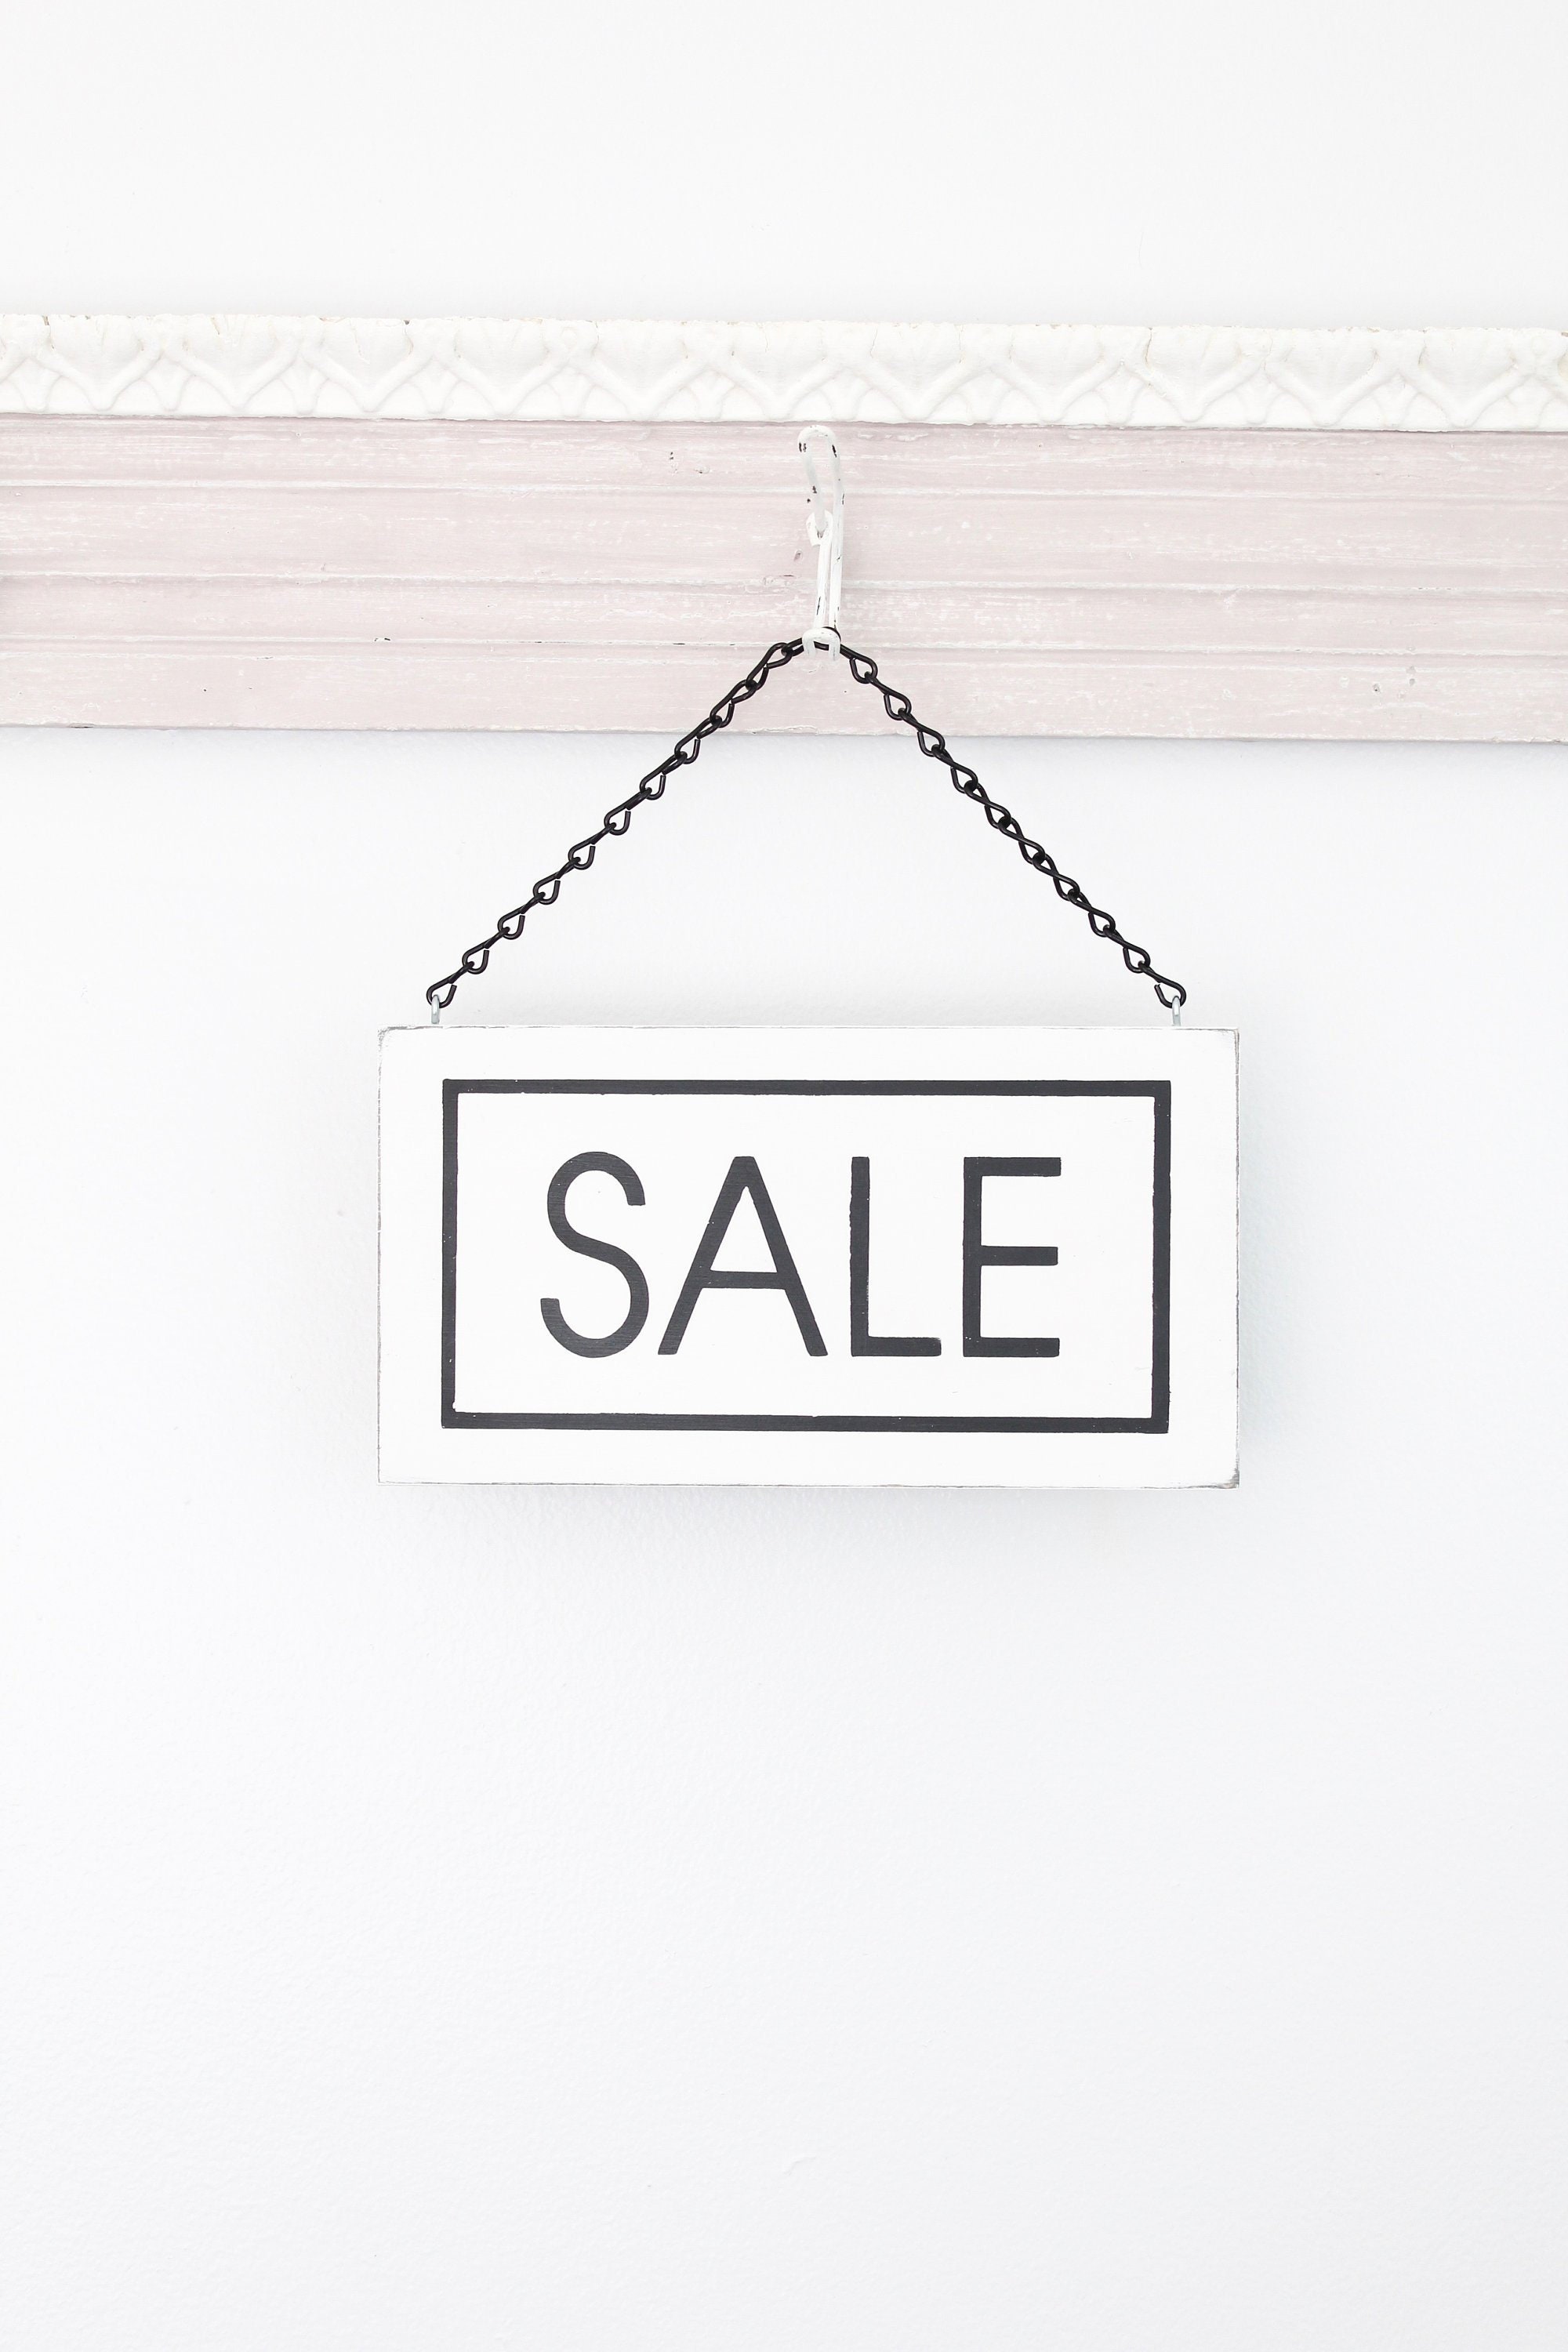 Clearance Sale Retail Shelf Signs 11X 7-10 signs